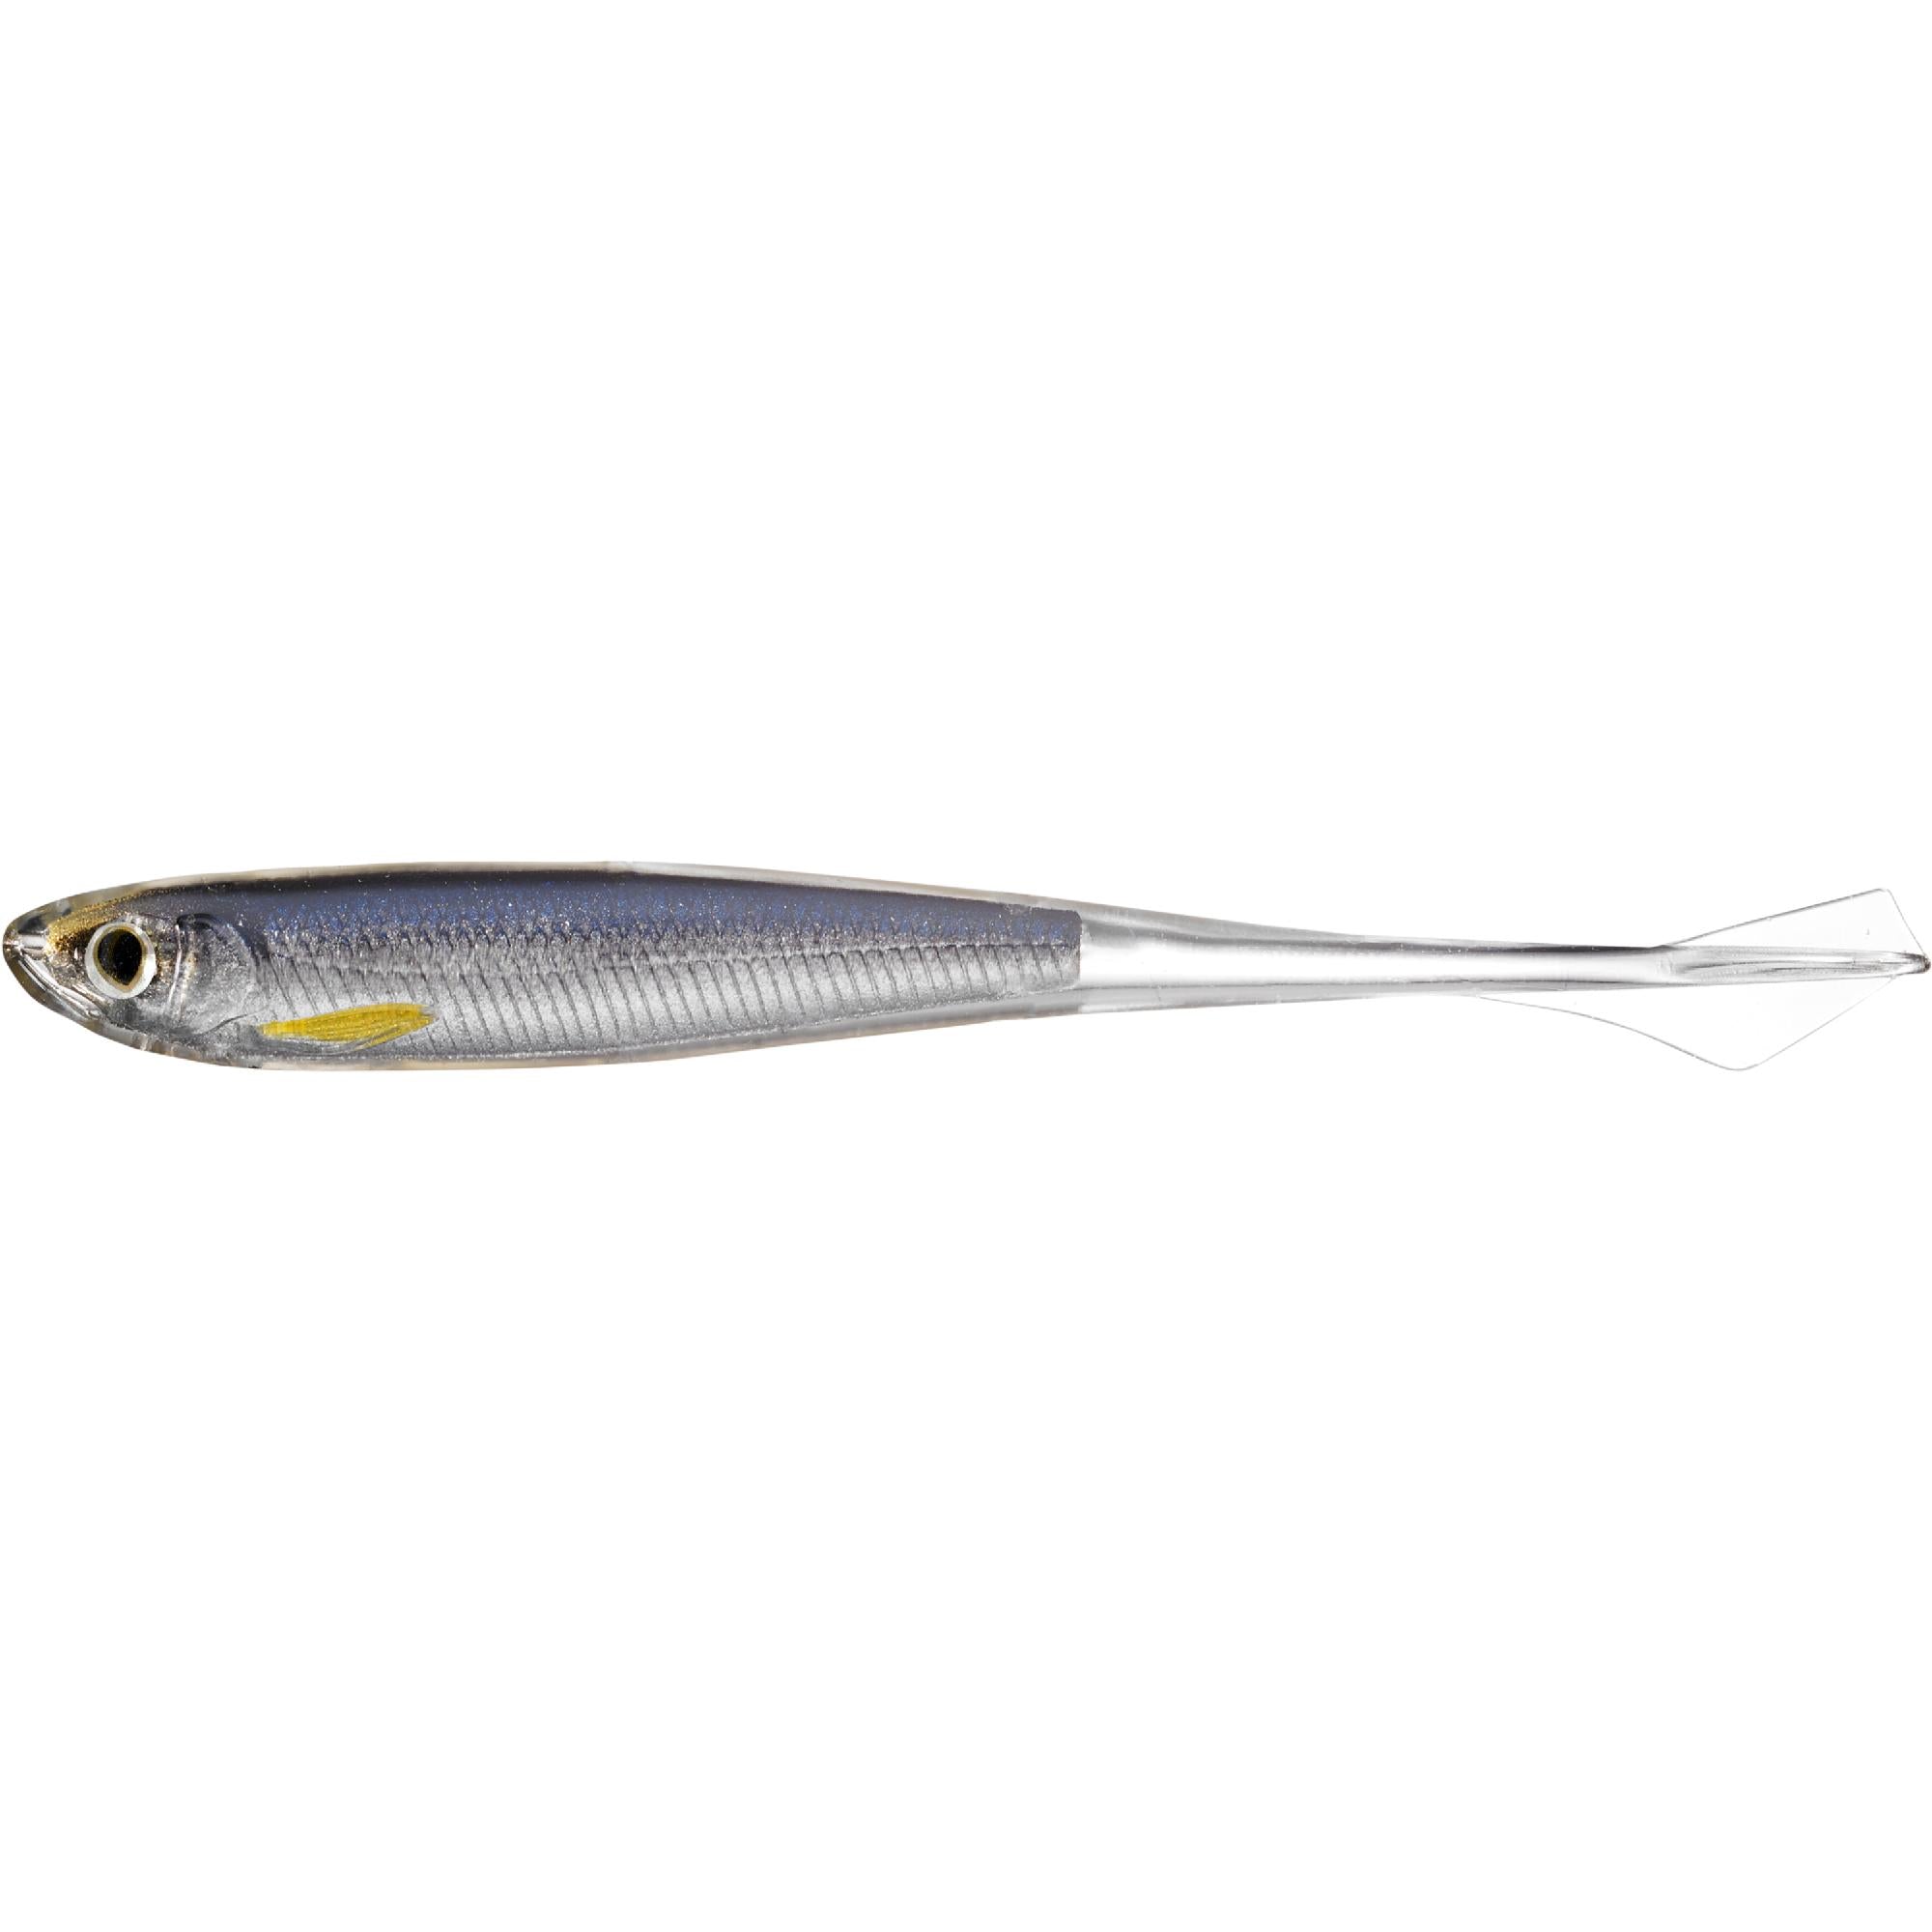 All Saltwater Lures